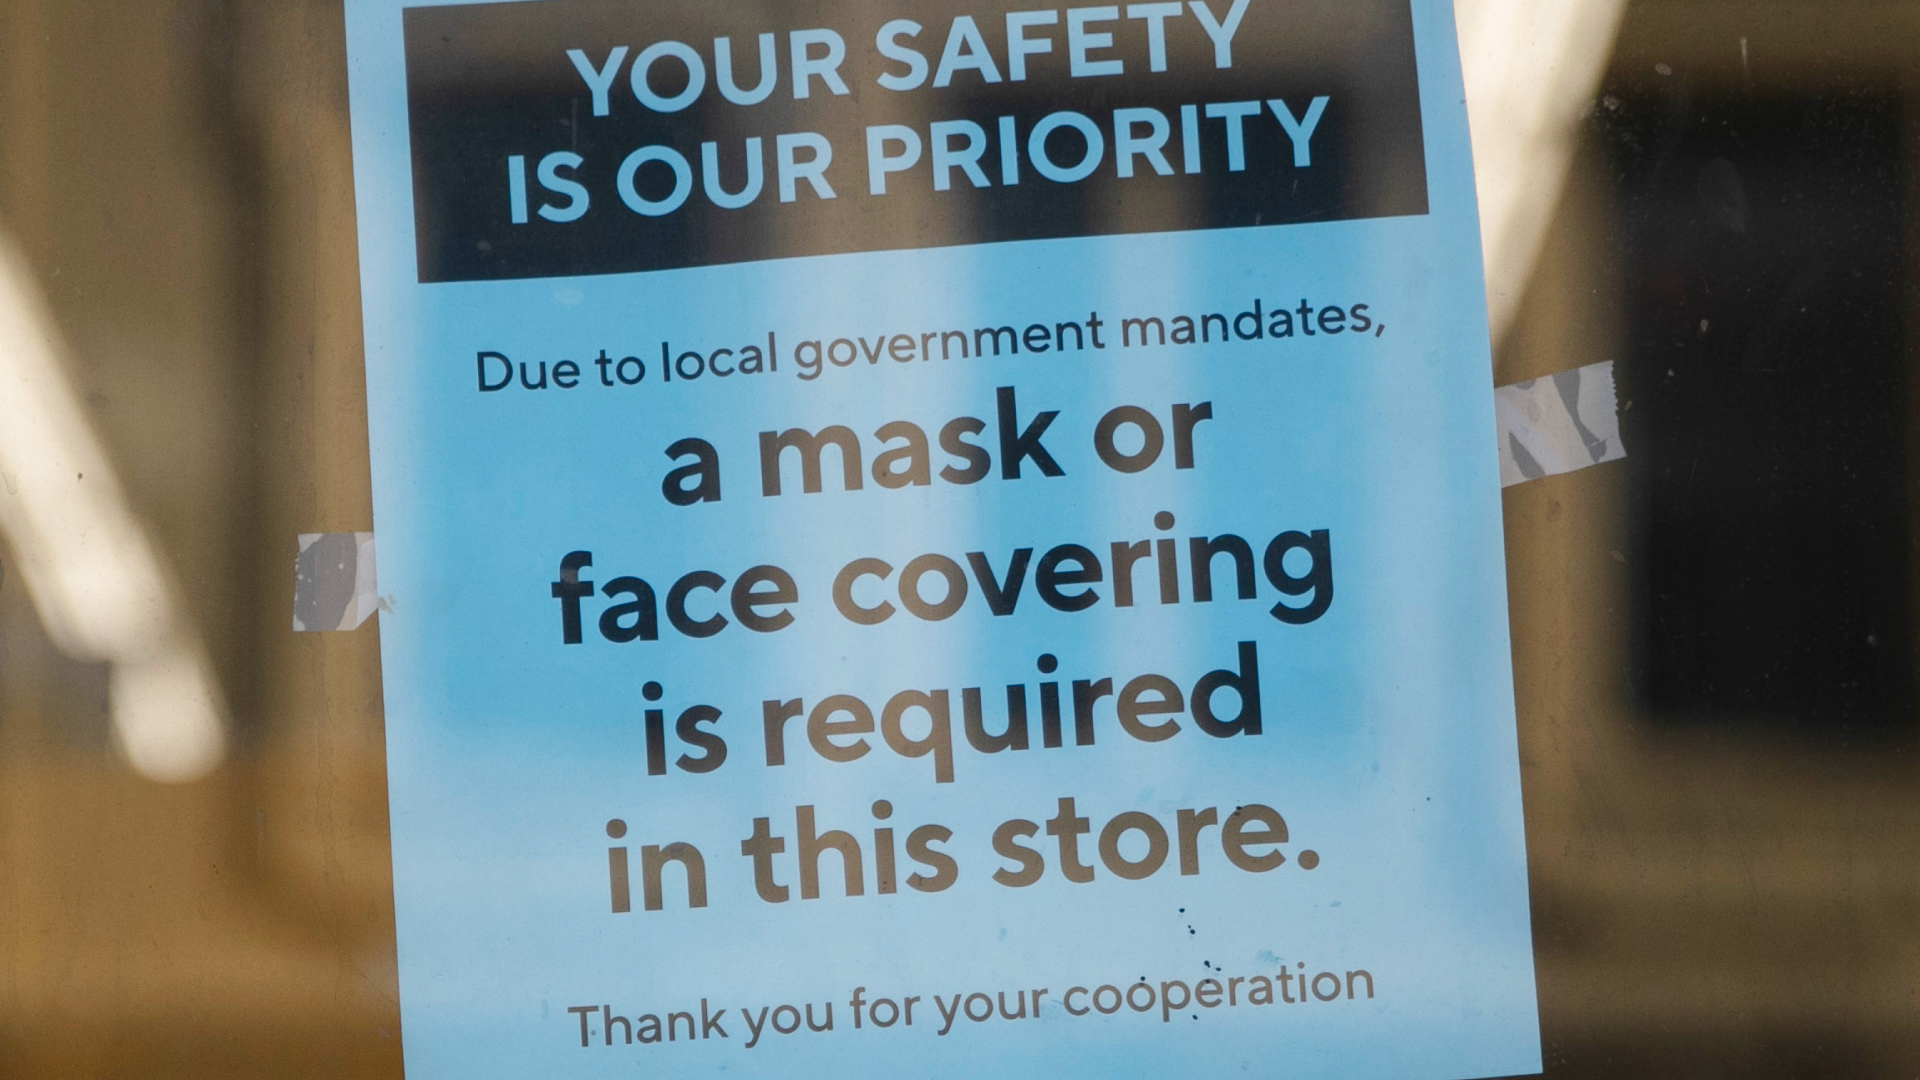 Until now, the state had allowed counties and local jurisdictions the ability to make up their own guidance on the use of face coverings. That's all changing.